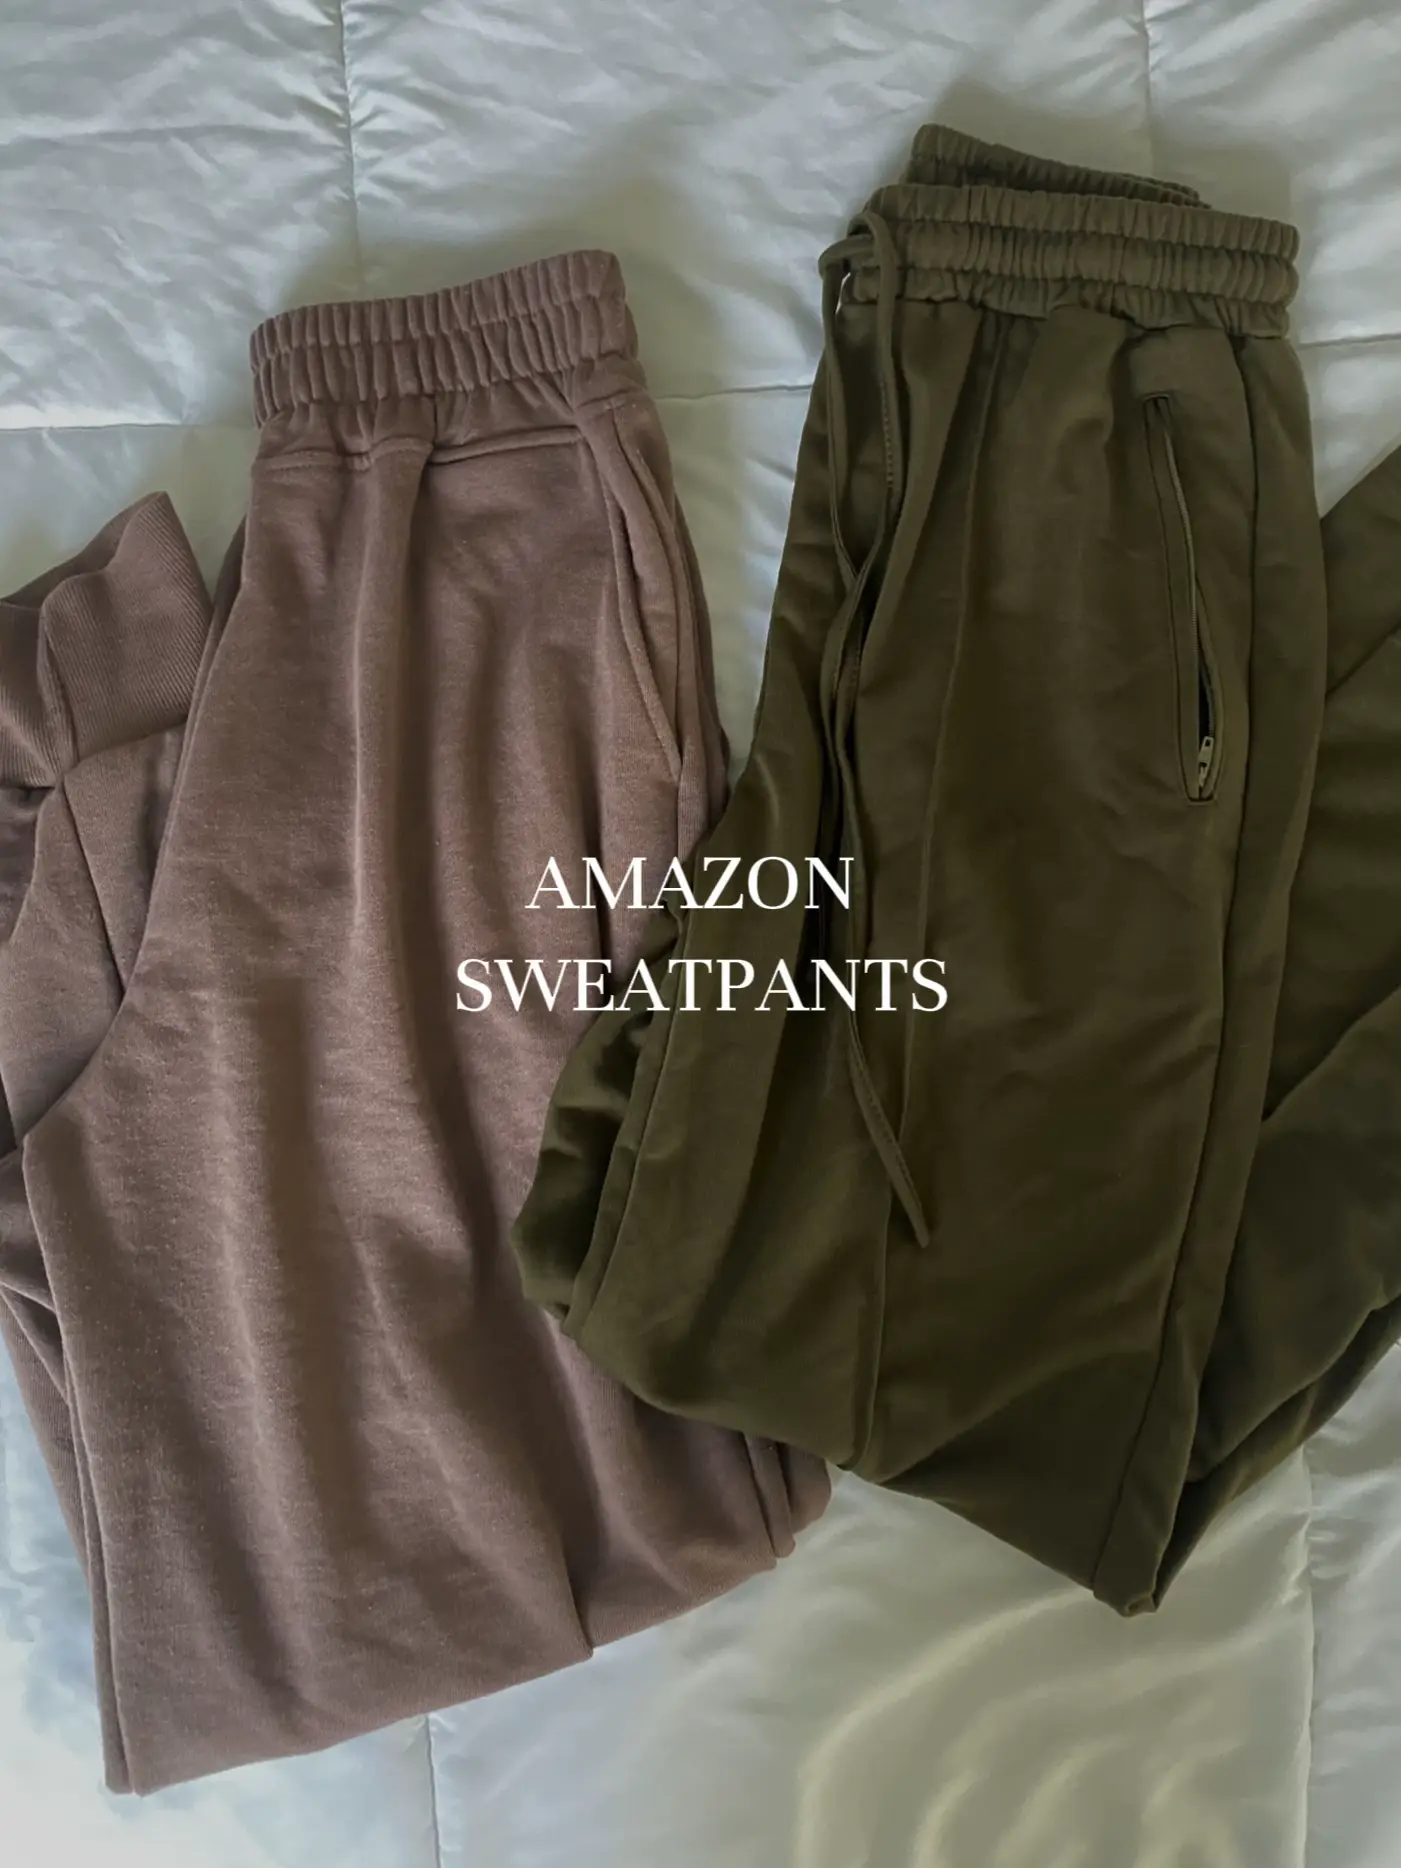 Elastic Waisted Waffle Cinched Bottom Sweatpants for Women with Pockets  Loose Straight Leg Casual Joggers Pants (XX-Large, Army Green)